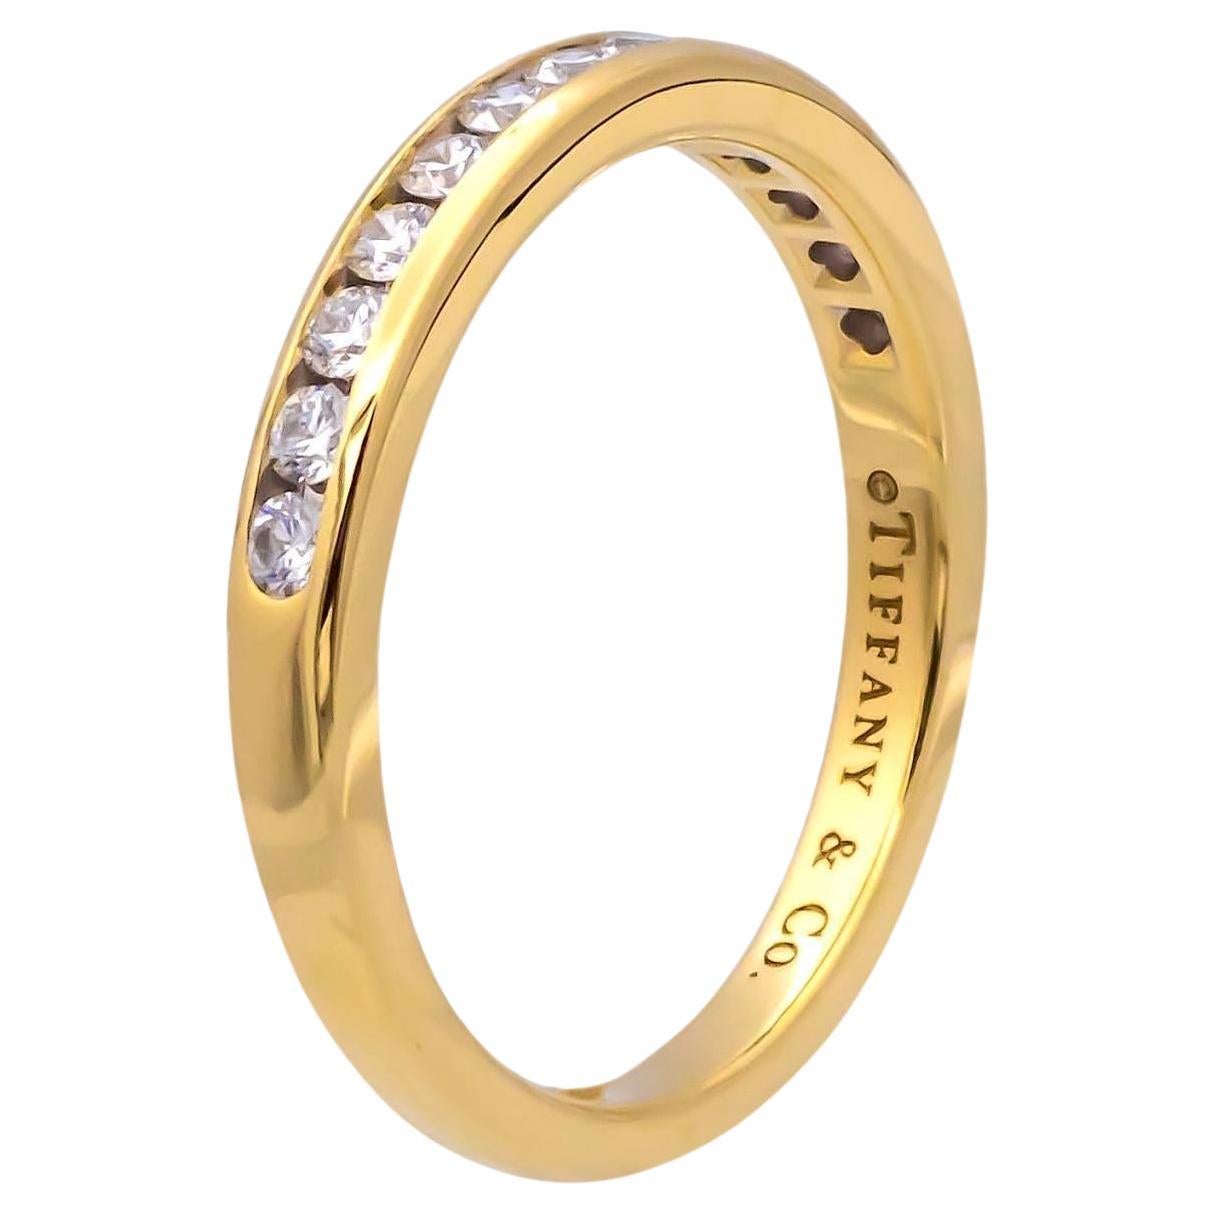 Tiffany & Co. 18K Yellow Gold Halfway Wedding Band Ring 0.22 cts 2.5mm For Sale